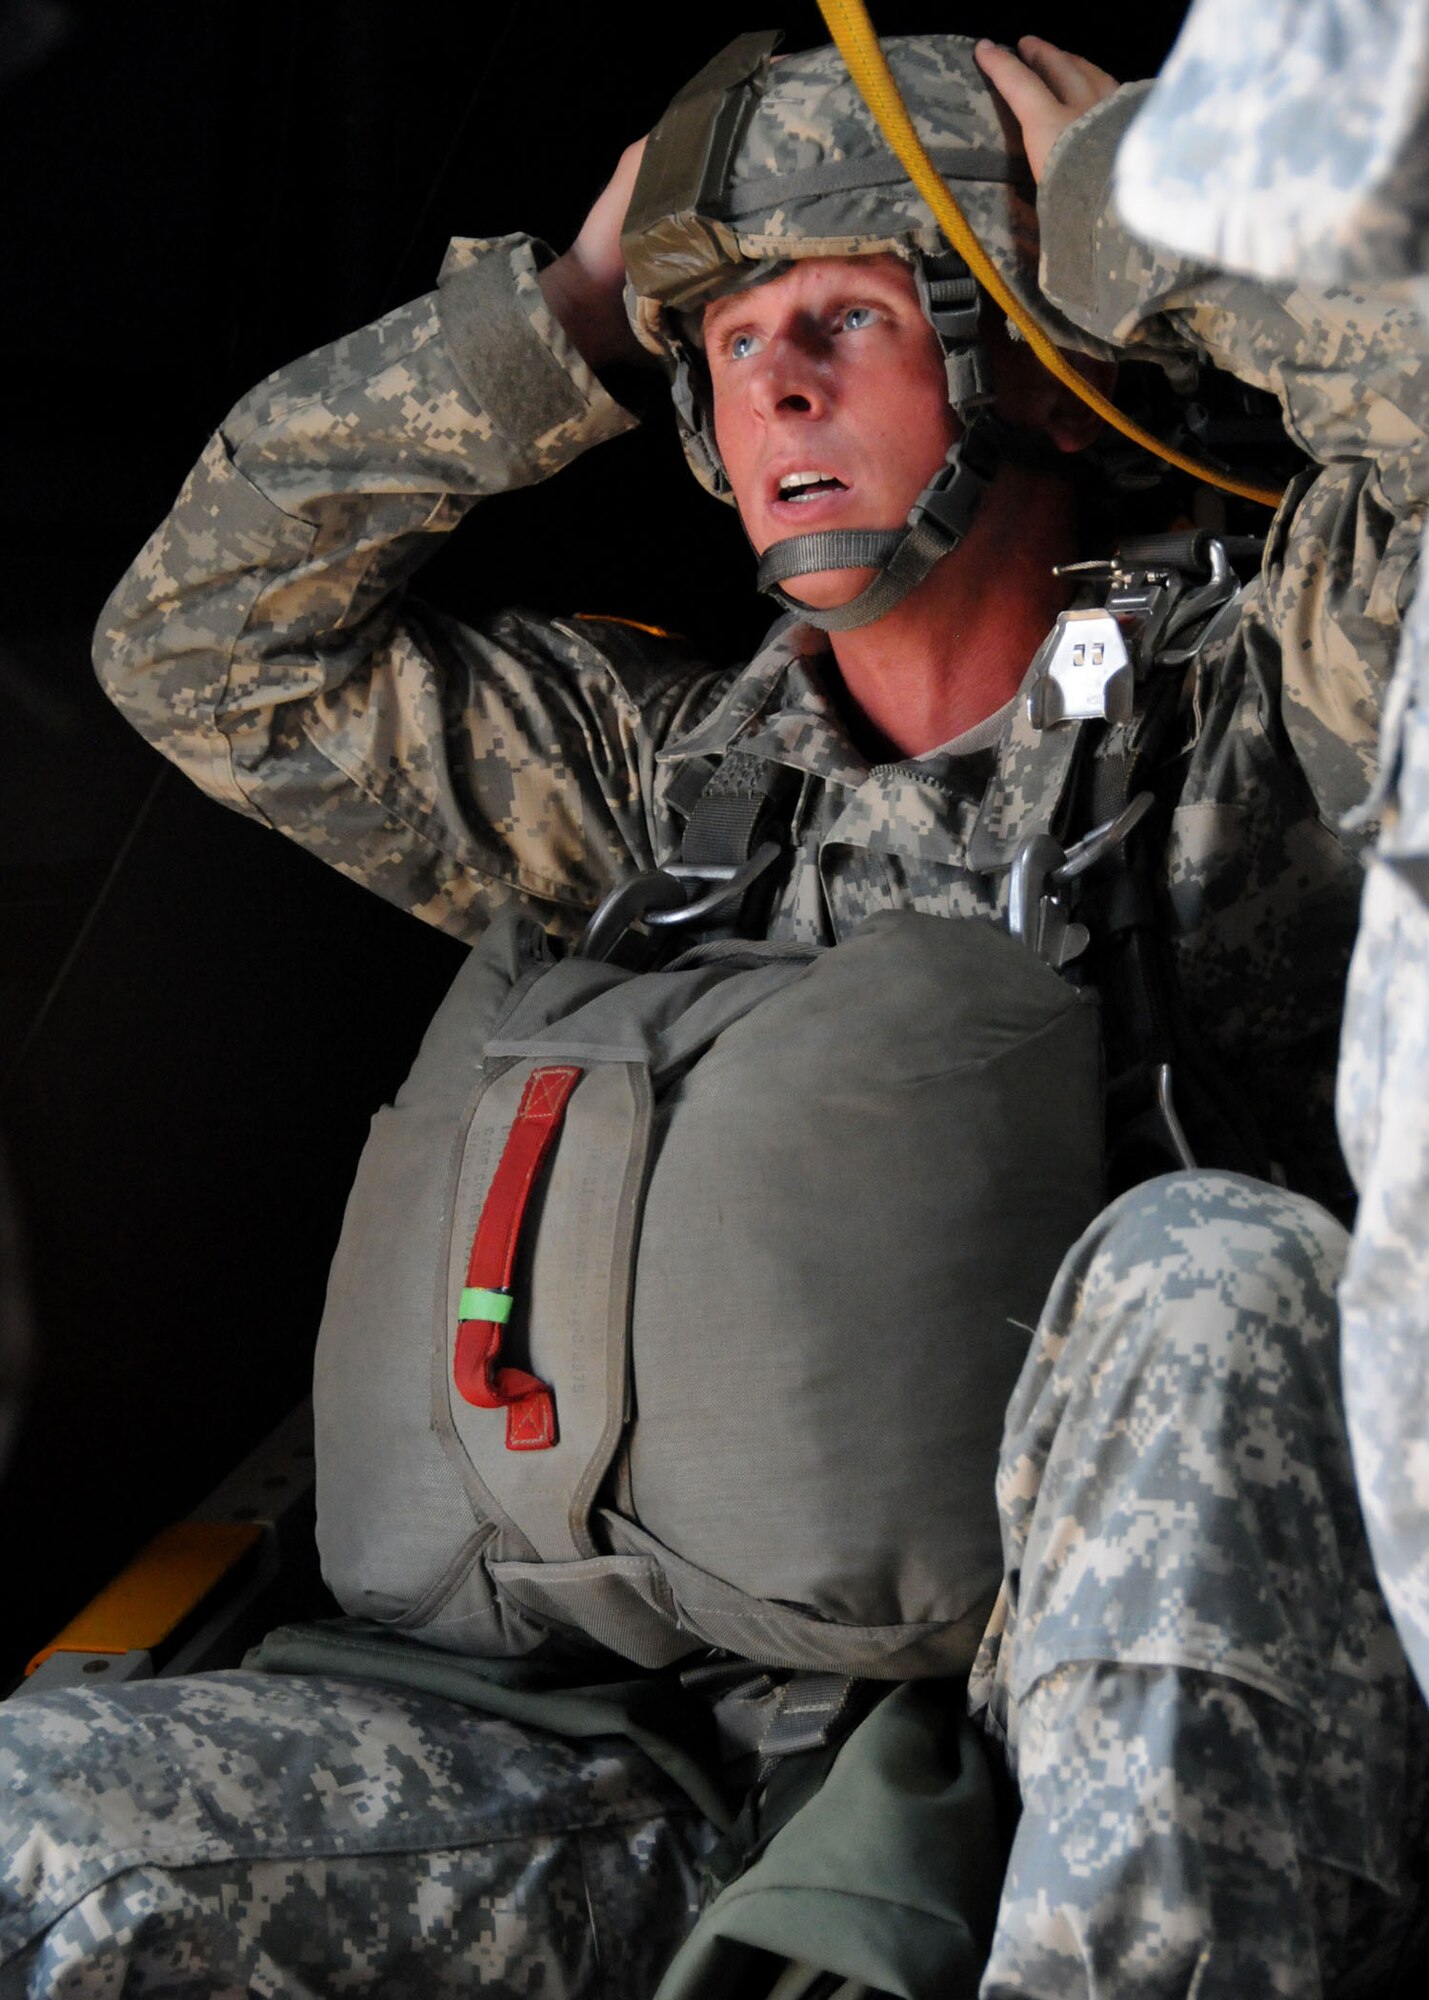 Will Illg, an actor, reacts to a scene during a simulated jump on the flight line at Duke Field, Fla., June 14. The production company, WILL Interactive, started work on a choose-your-own-adventure film for Department of Defense jumpmaster training at Fort Benning, Ga., with help from members from the U.S. Army Airborne School. However, when the crew needed a C-130 in portions of the video, the 919th Special Operations Wing offered to support the project at Duke Field June 13-15. (U.S. Air Force photo/Tech. Sgt. Cheryl Foster)